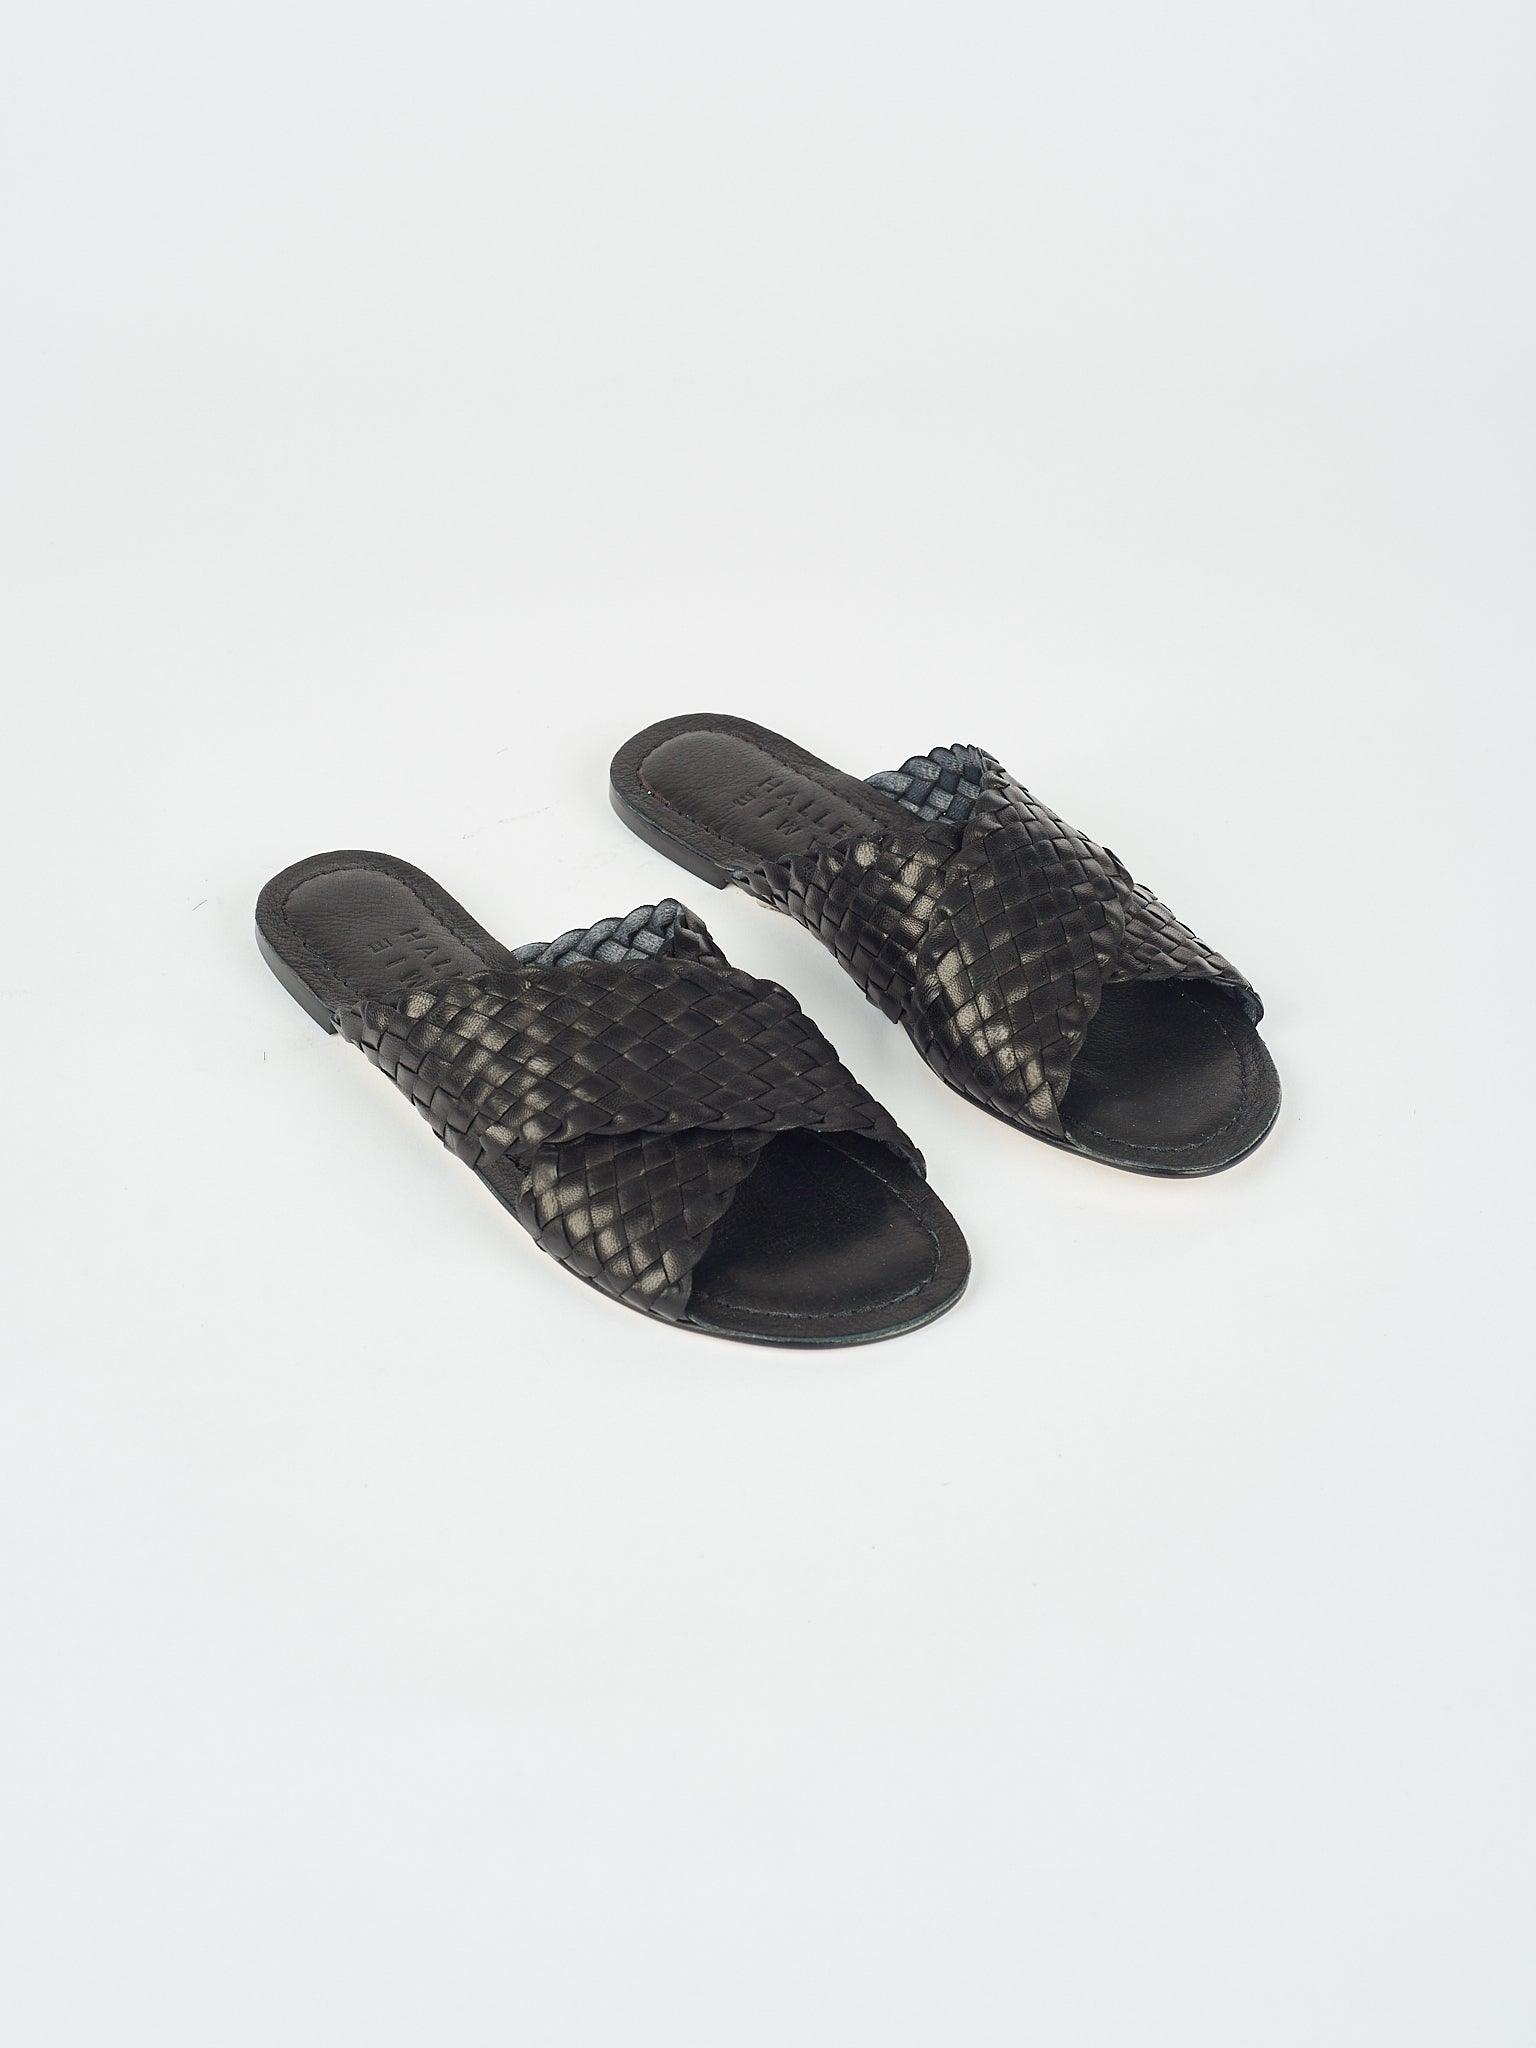 The Woven Strap Slide in Black Angled Front View